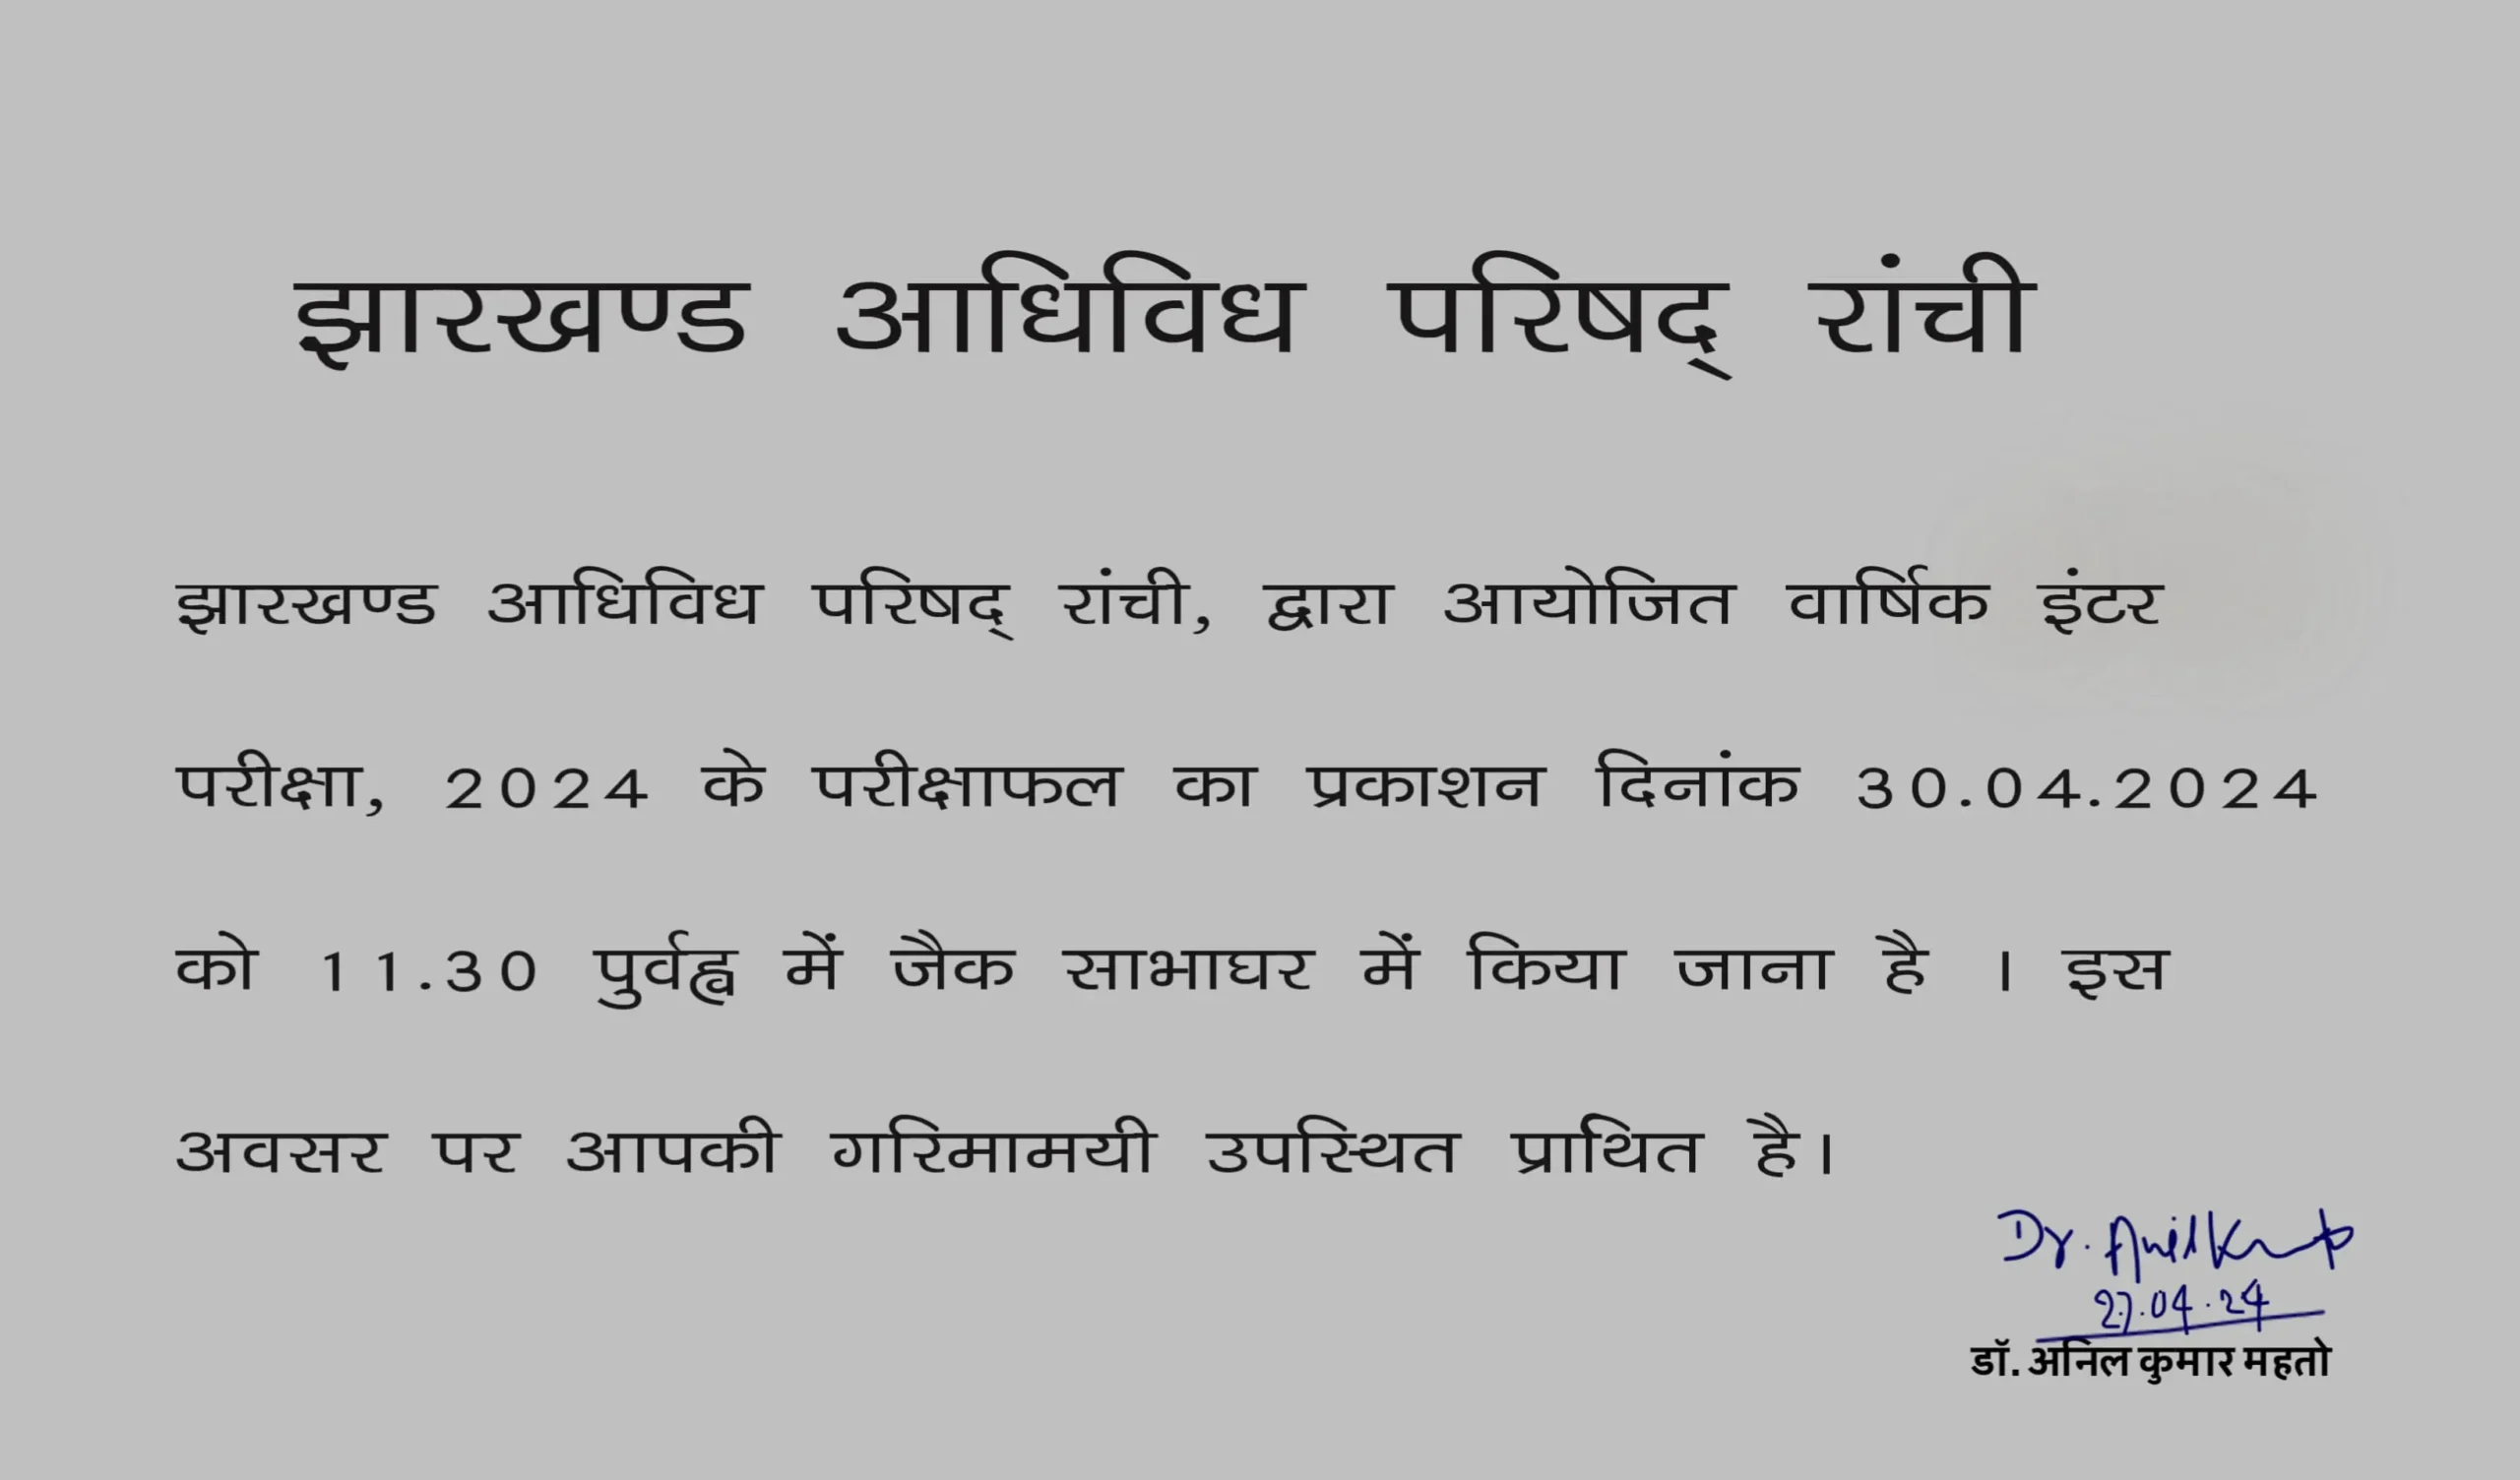 JAC Class 12th Science result 2024